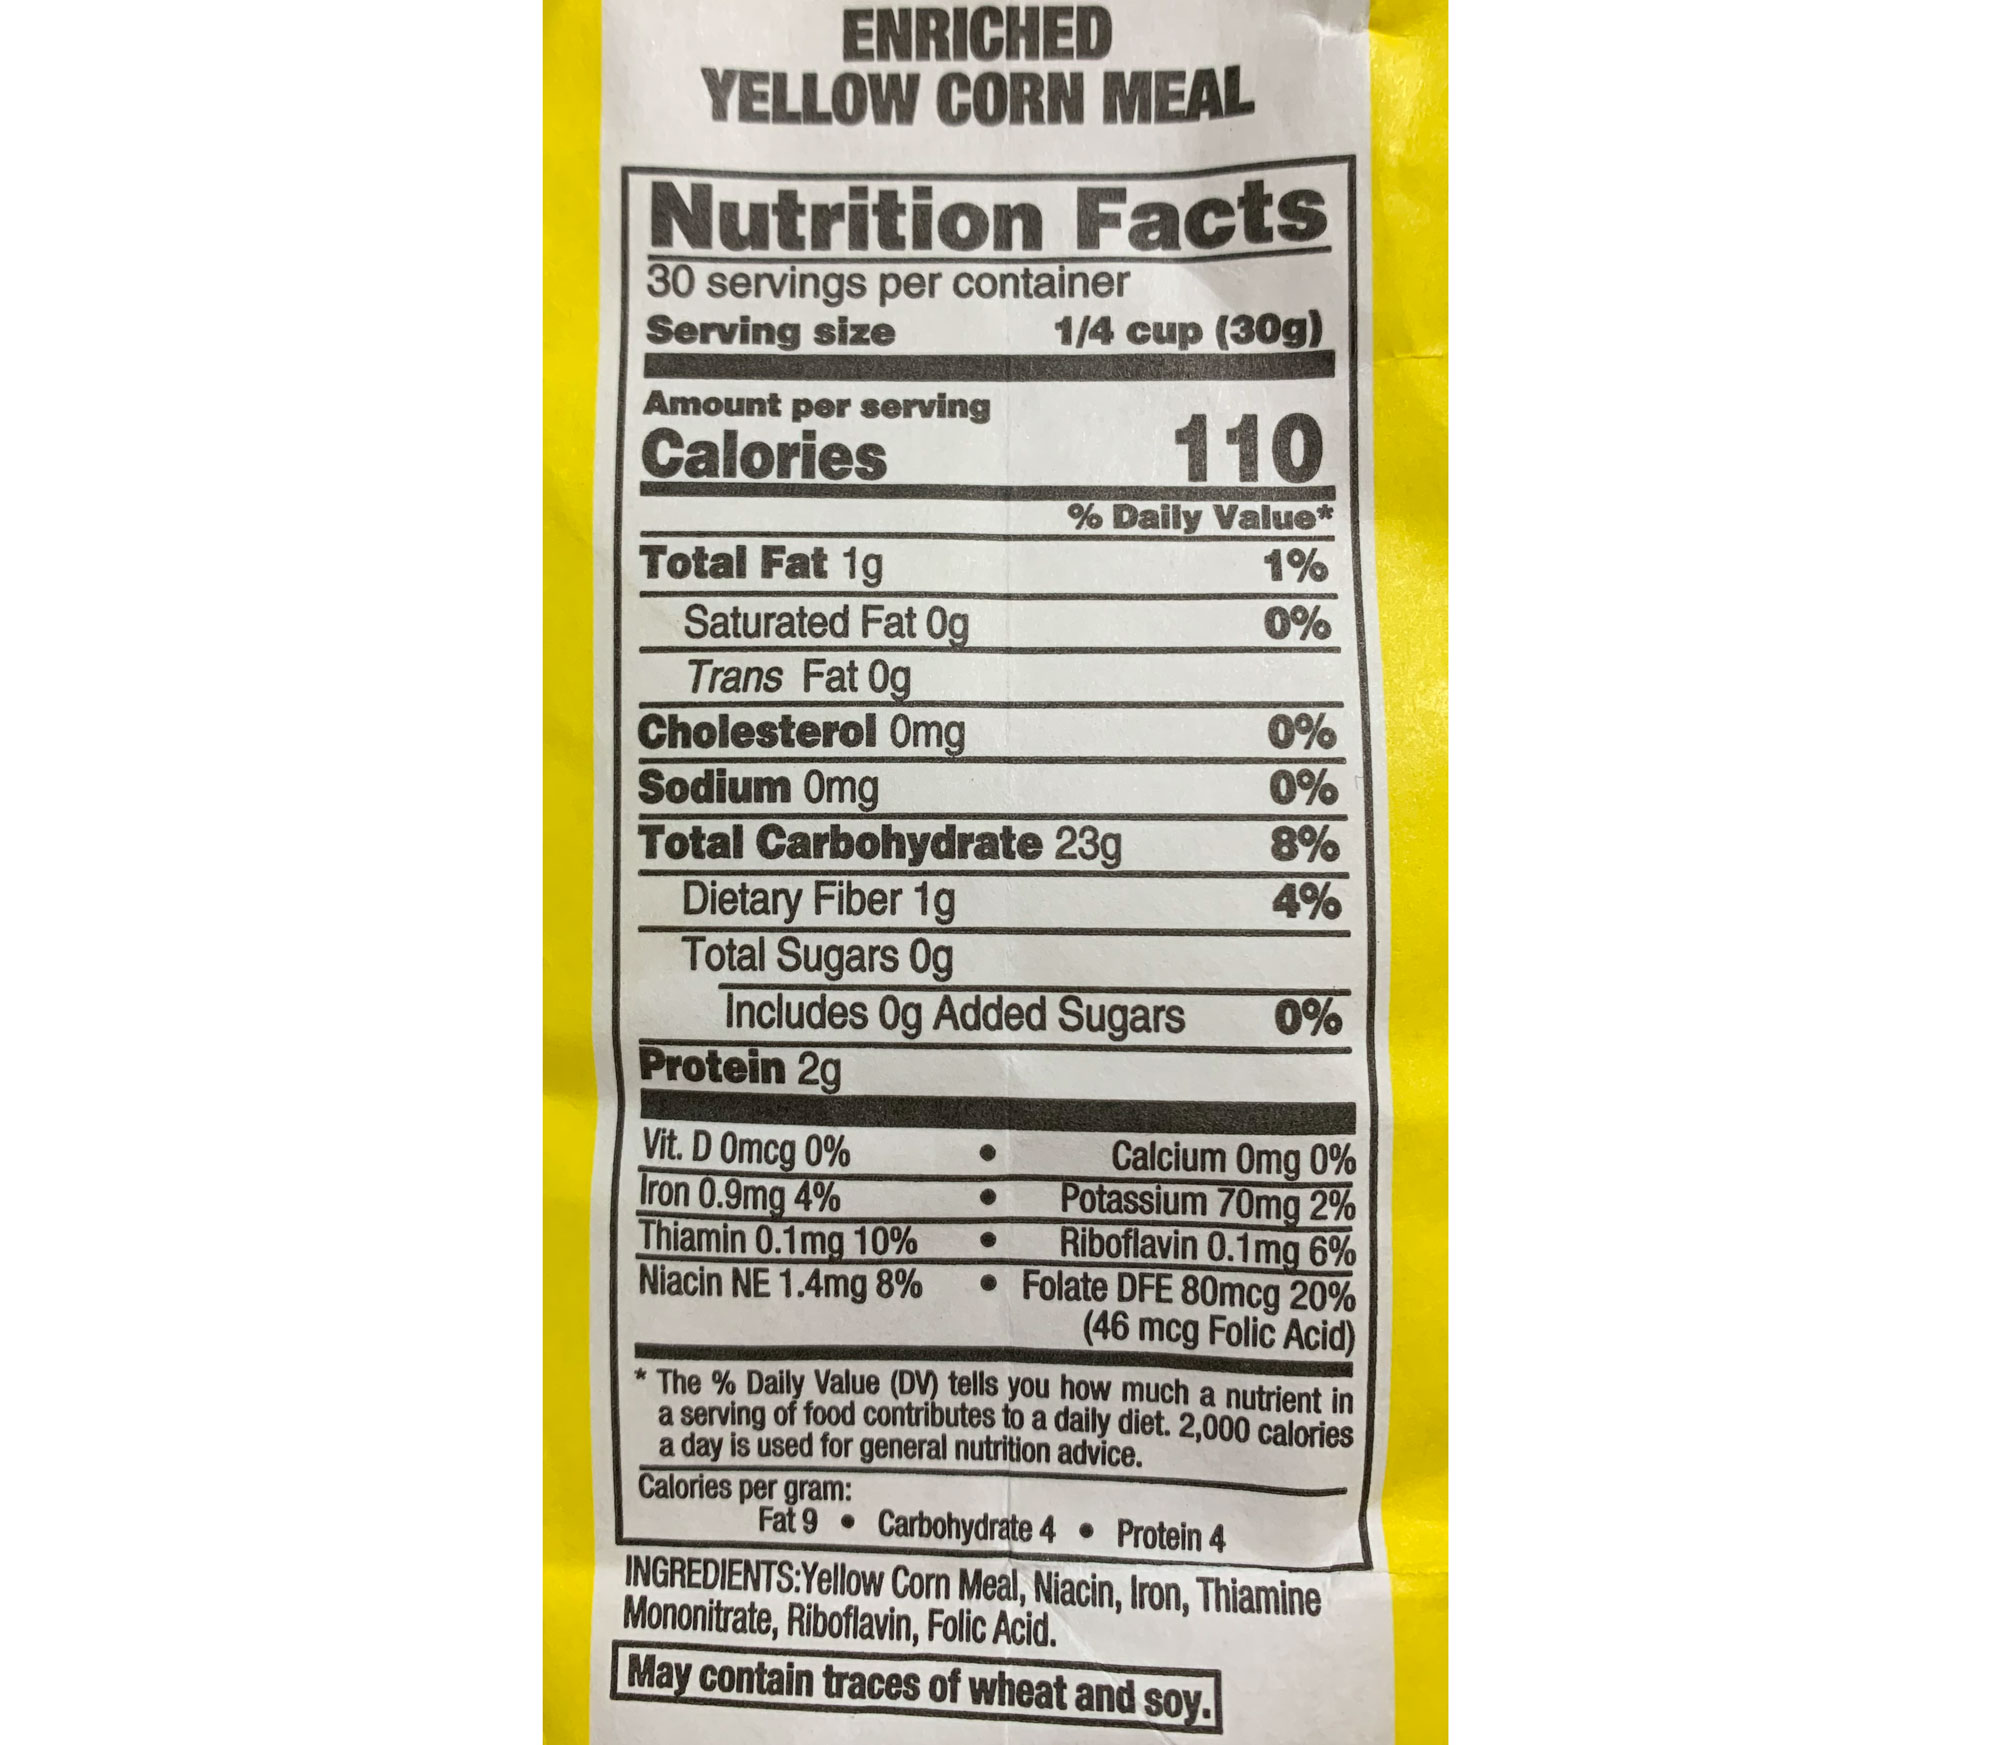 Photograph of a nutritional label from a package of corn meal, U.S.A. The top of the label says "enriched yellow corn meal" in all-caps. Beneath that is a box labeled "Nutrition Facts" with nutritional information. Below the box is a list of ingredients. The ingredients are yellow corn meal, niacin, iron, thiamine mononitrate, riboflavin, folic acid. Below that is a small box that says "May contain traces of wheat and soy."